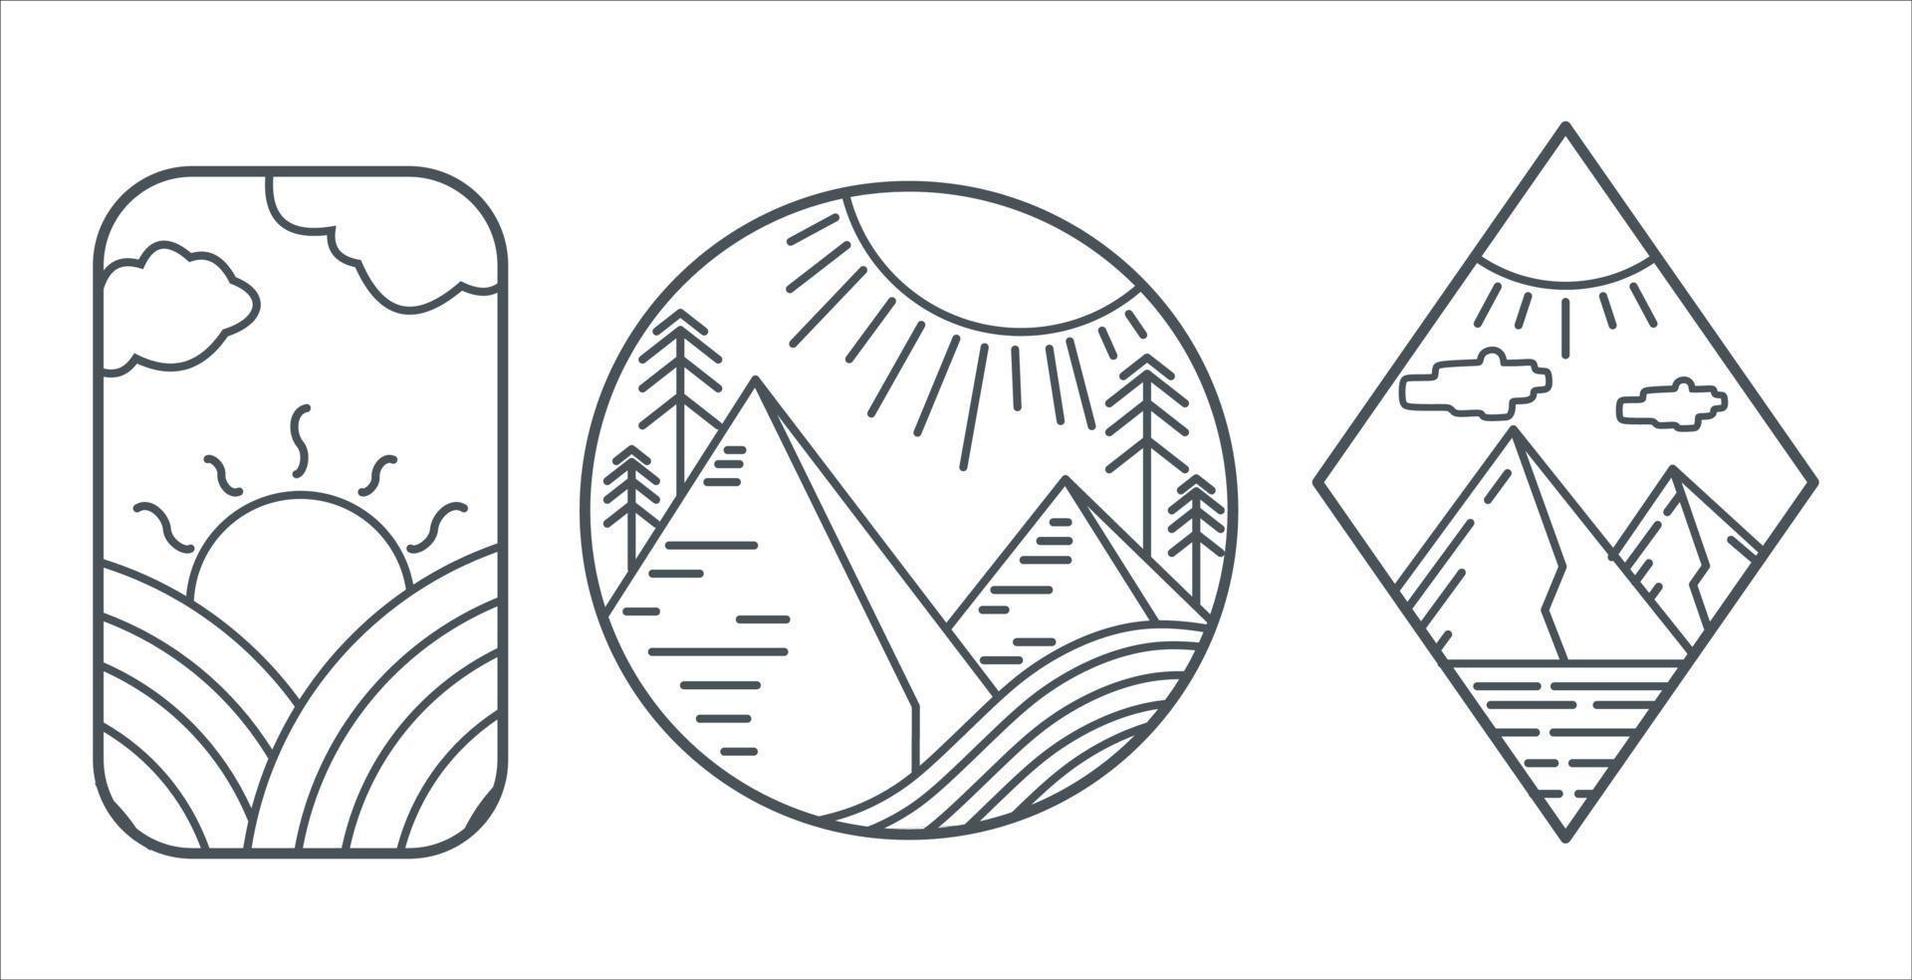 Vintage simple mountain logo with line art style vector